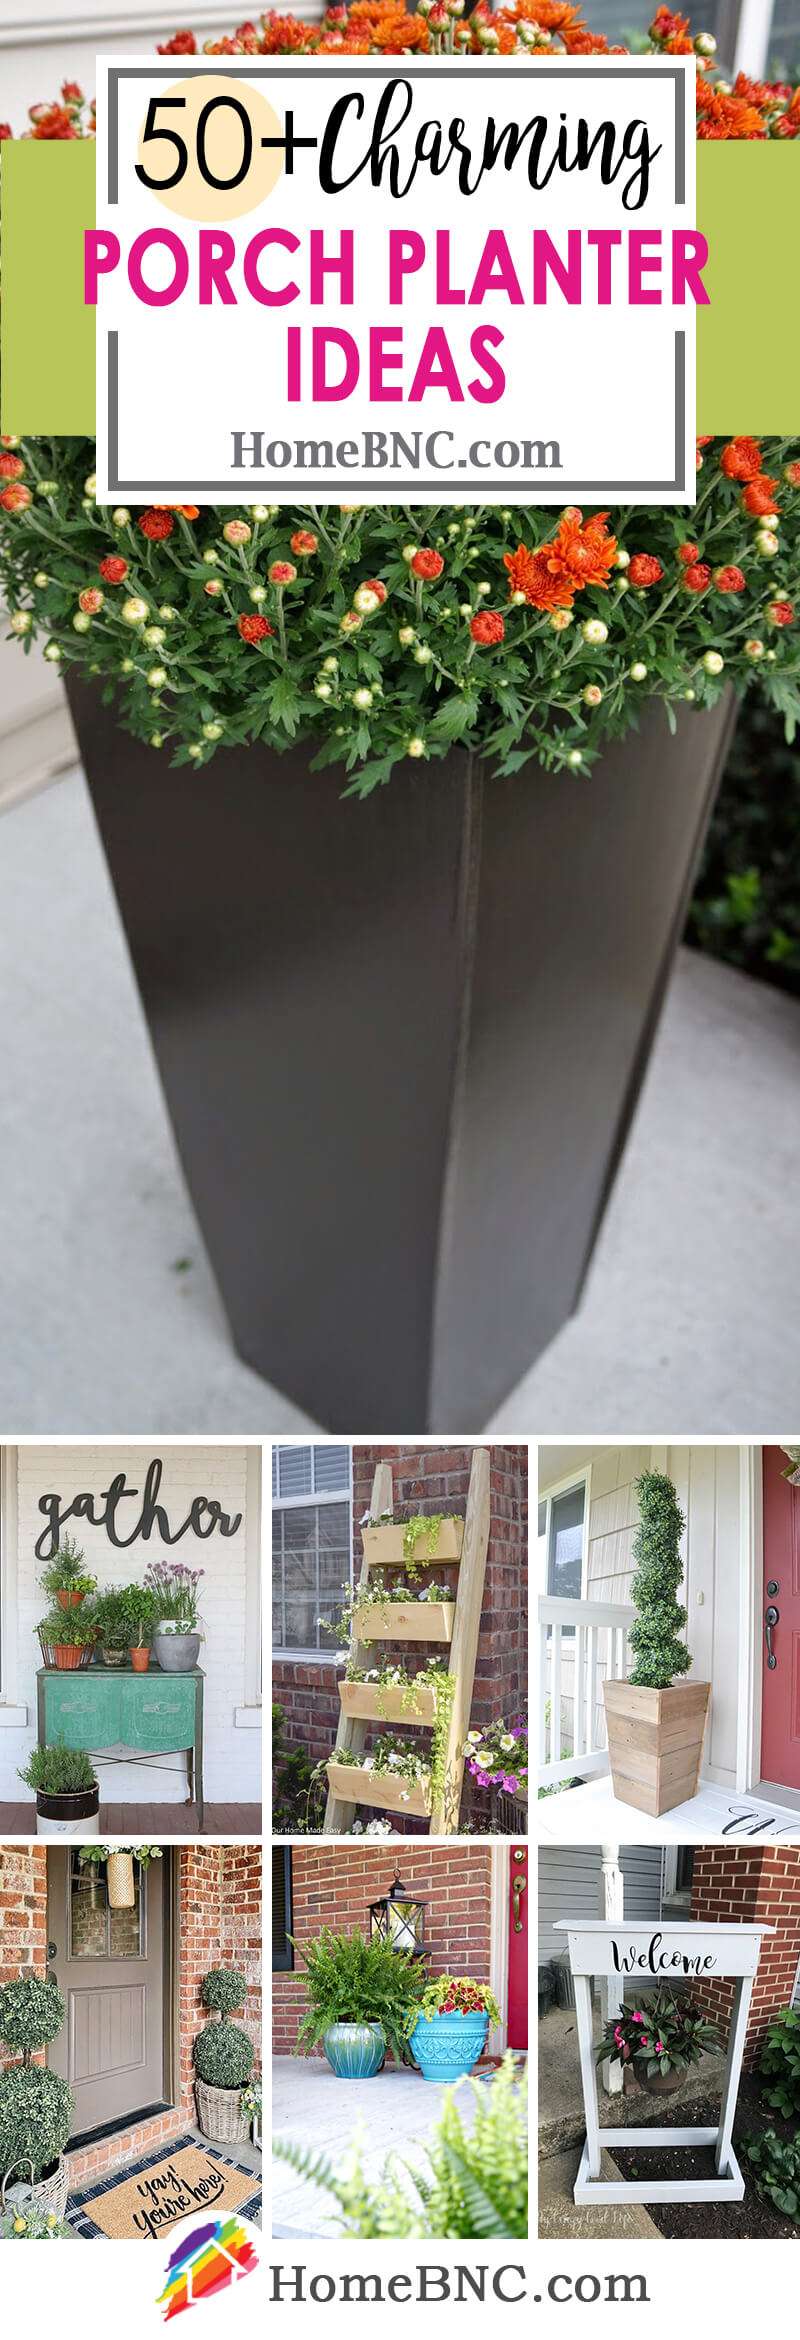  Best Porch Planter Ideas And Designs For  - Large Planter Ideas For Front Of House